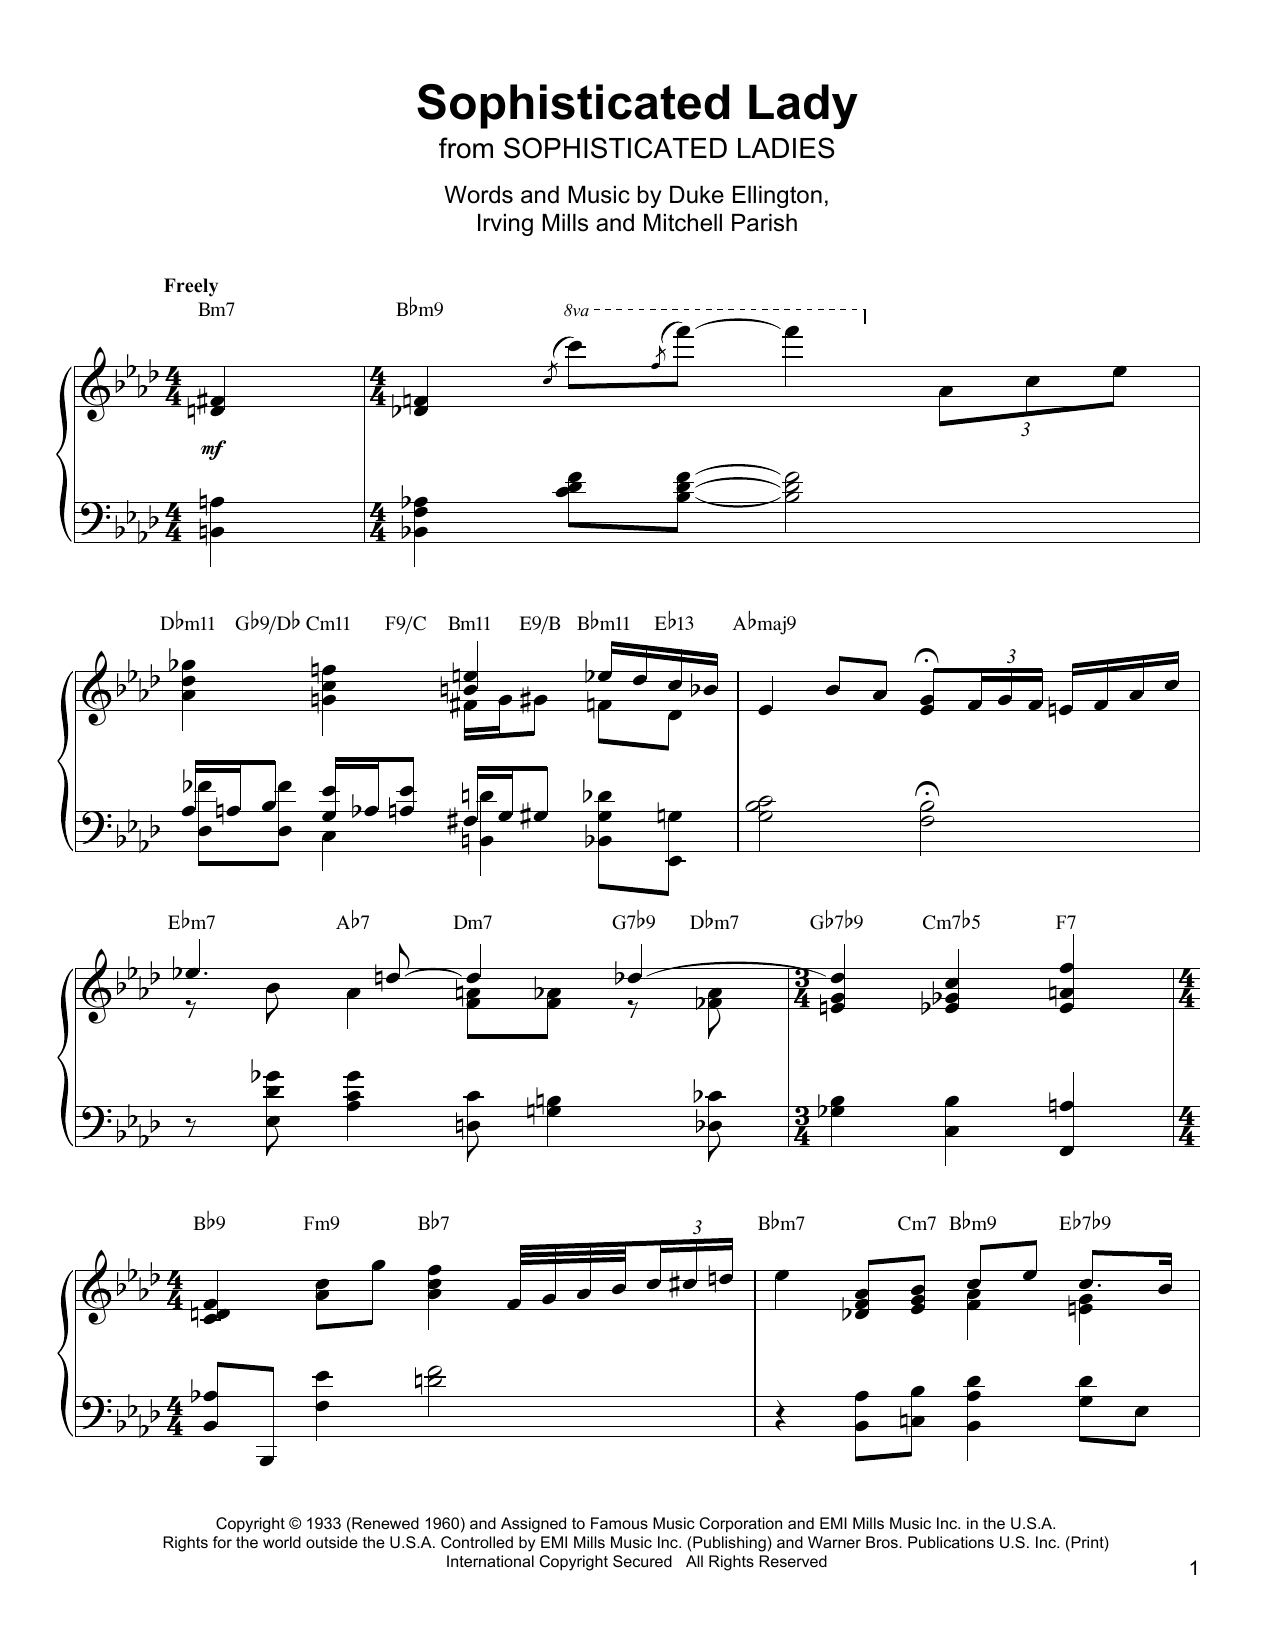 Download Oscar Peterson Sophisticated Lady Sheet Music